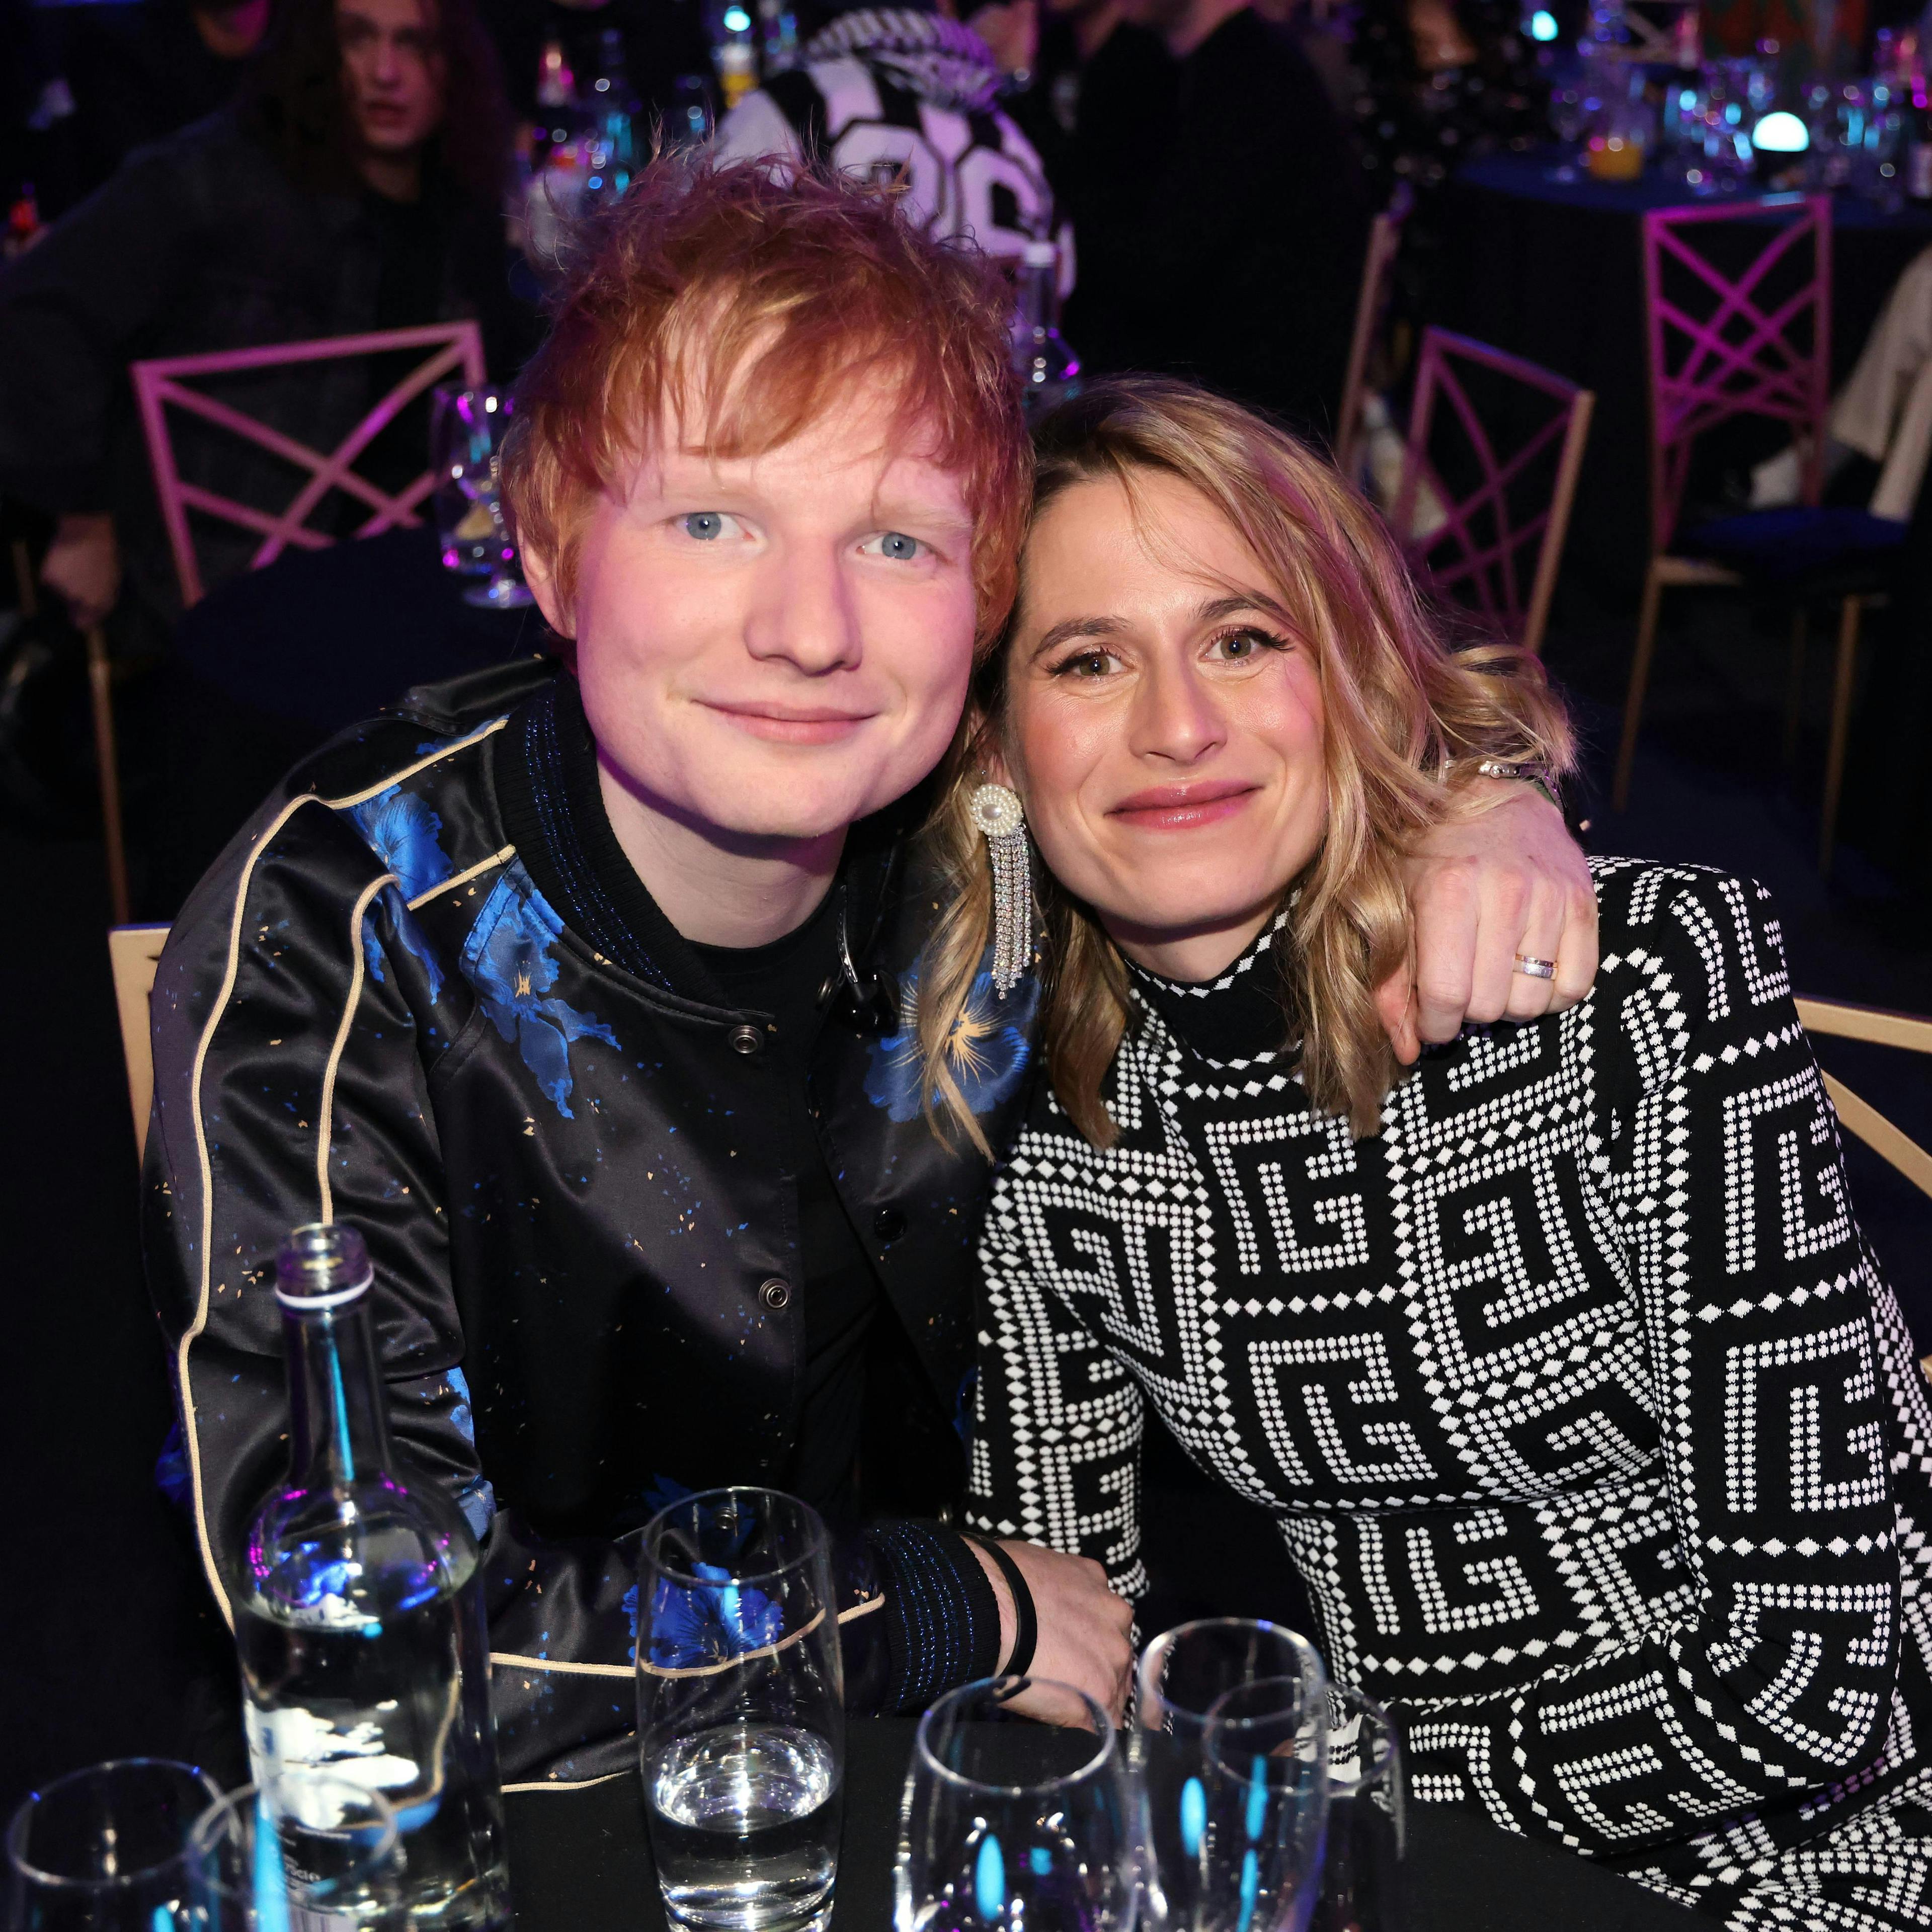 Ed Sheeran Says He Felt Like He Was 'Drowning' After Wife's Cancer Diagnosis, Reveals How It Impacted Marriage undefined